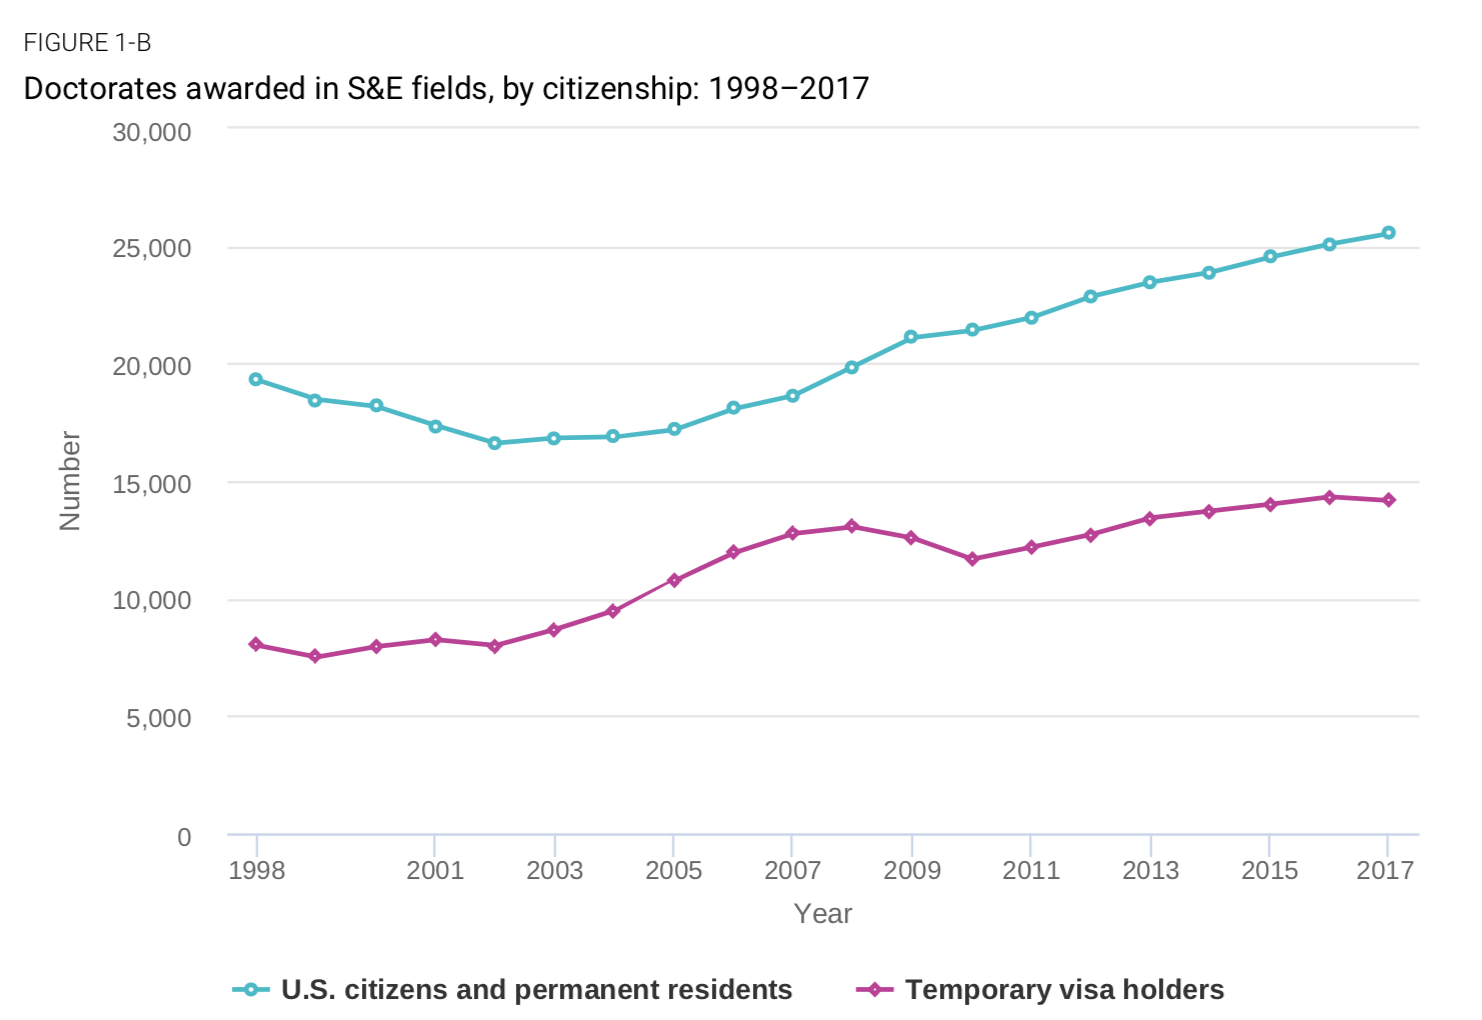 Doctorates awarded in S&E fields, by citizenship: 1998–2017. In 2017, the number of doctorates in S&E fields awarded to temporary visa holders was 14,166, a decline of 159 from 2016. Overall growth was still up 77% since 1998 and 9% since 2008. The proportion of S&E doctorates awarded to temporary visa holders peaked at 41% in 2007 but has held steady at around 36% since 2011.  In comparison, the number of S&E doctorates awarded to U.S. citizens and permanent residents grew 2% from 2016 to 2017 but experienced a slower growth overall (32% since 1998 and 29% since 2008), although from a larger base.